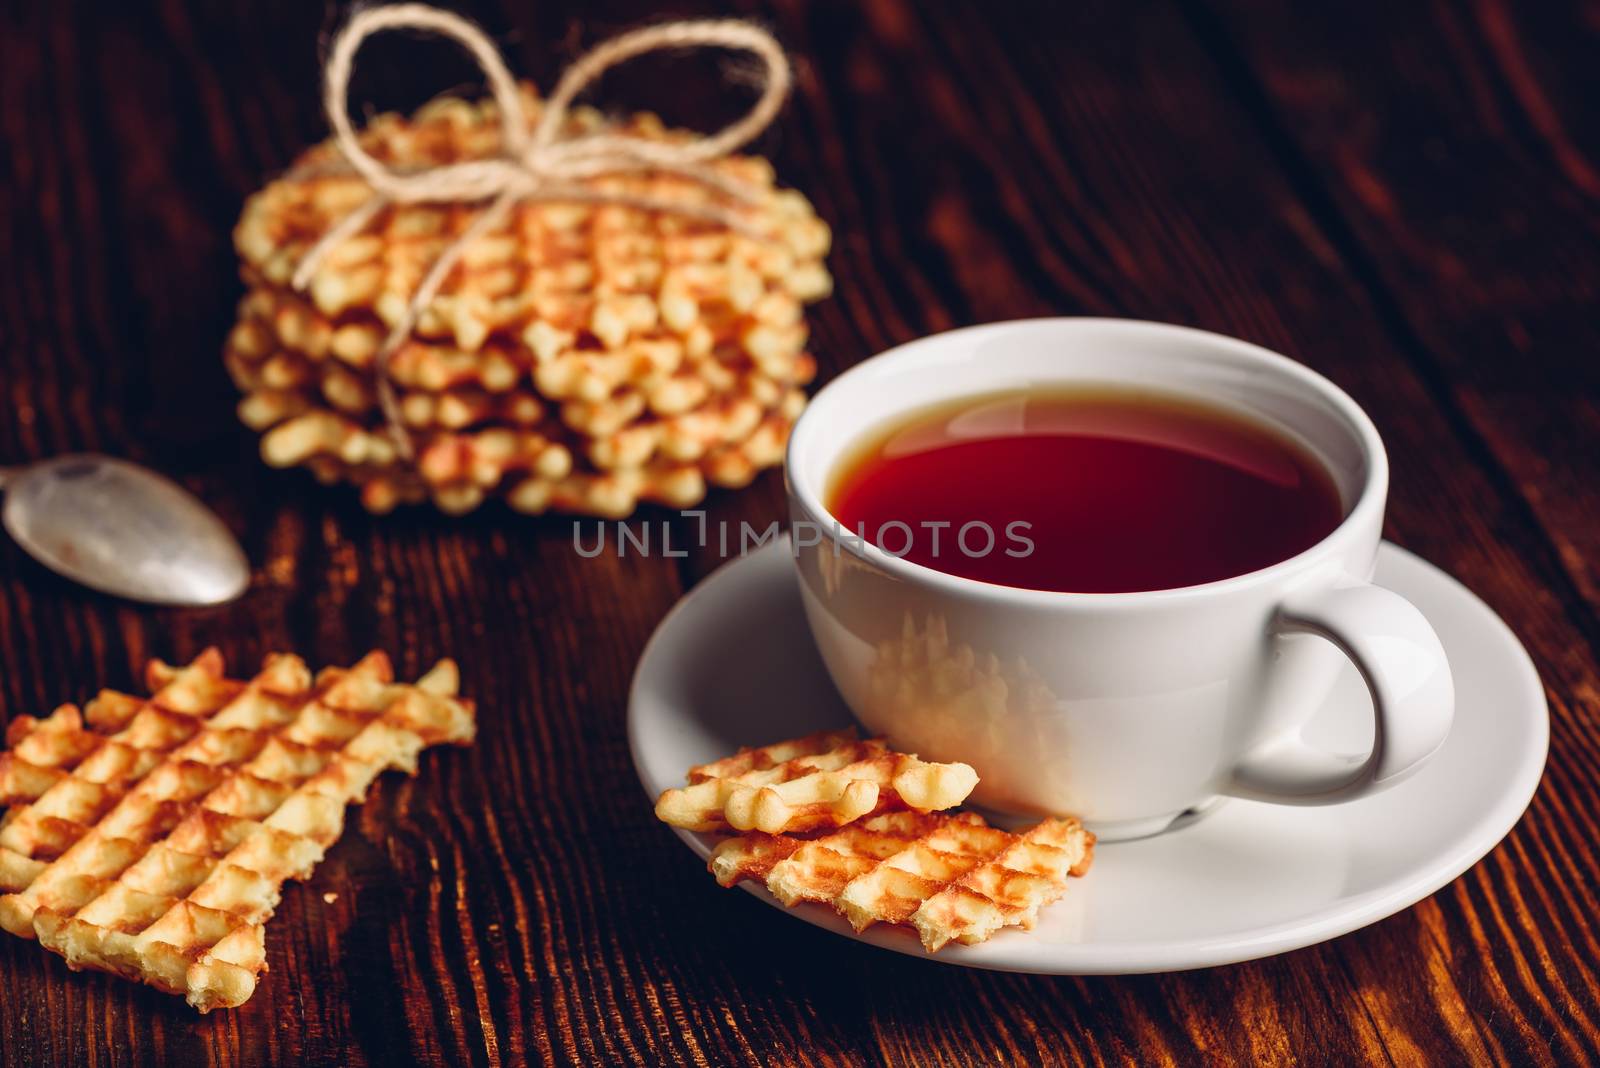 White Cup of Tea with Belgian Waffles Stack and Pieces of Waffle on Wooden Surface.